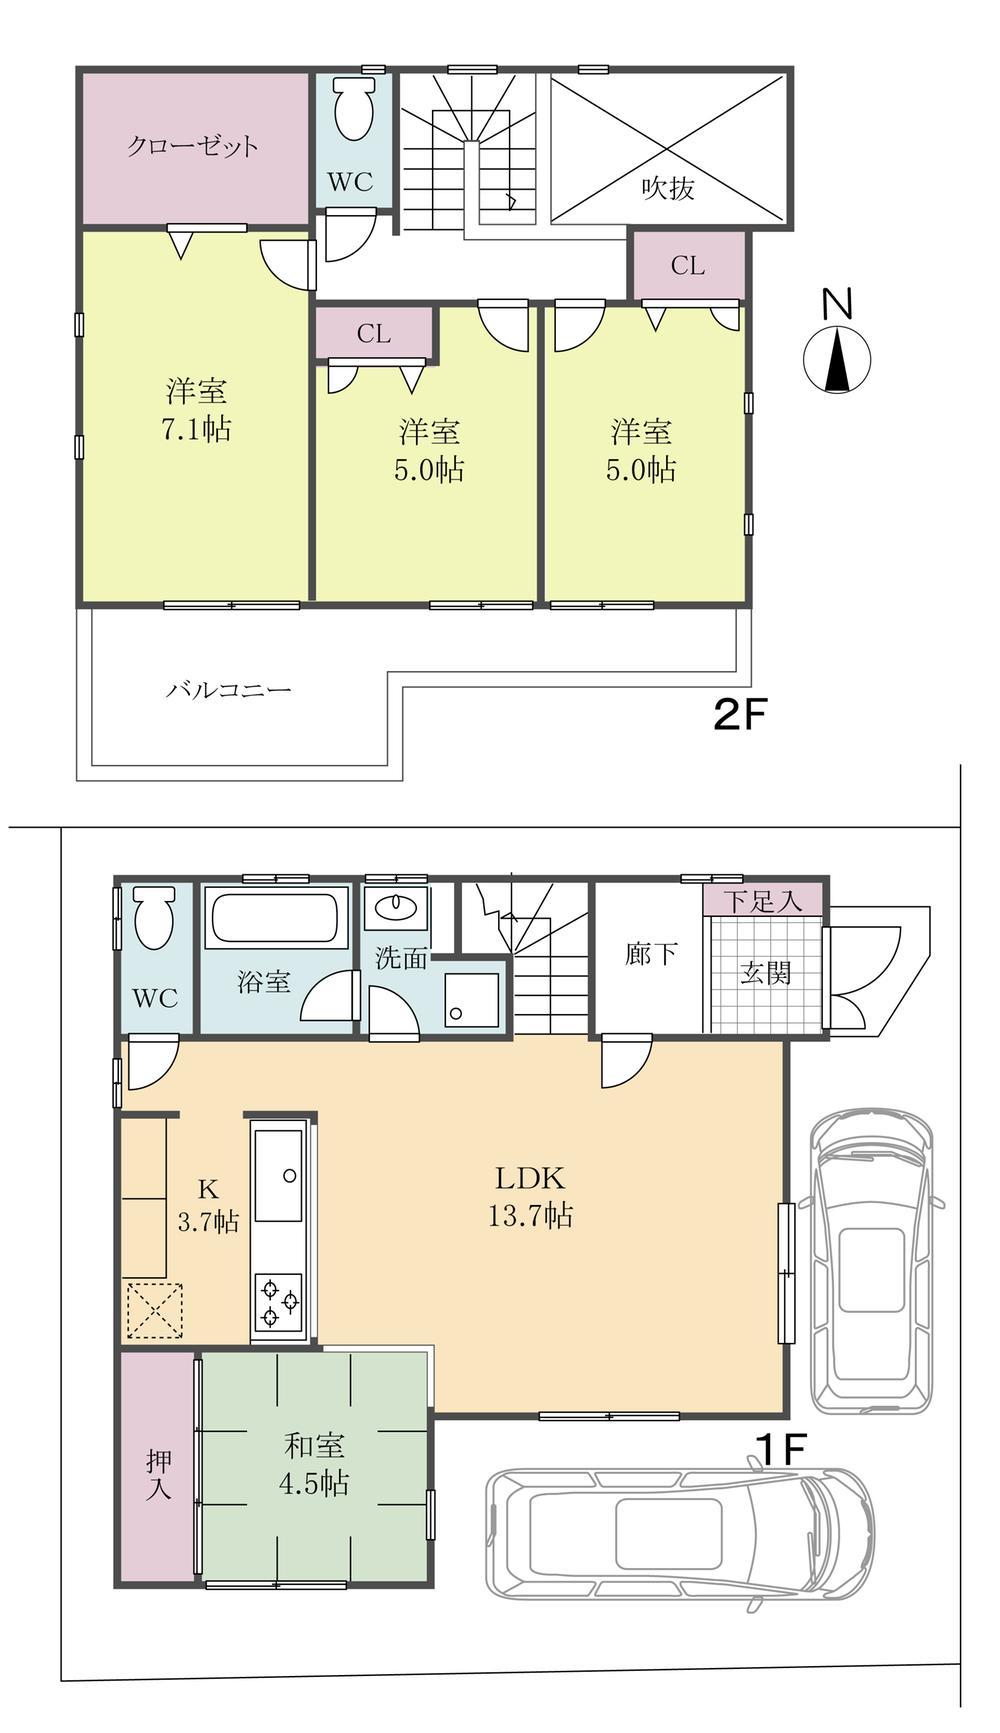 Floor plan. Spacious floor plan has a margin of greater than 100 sq m is attractive (No. 1 point)